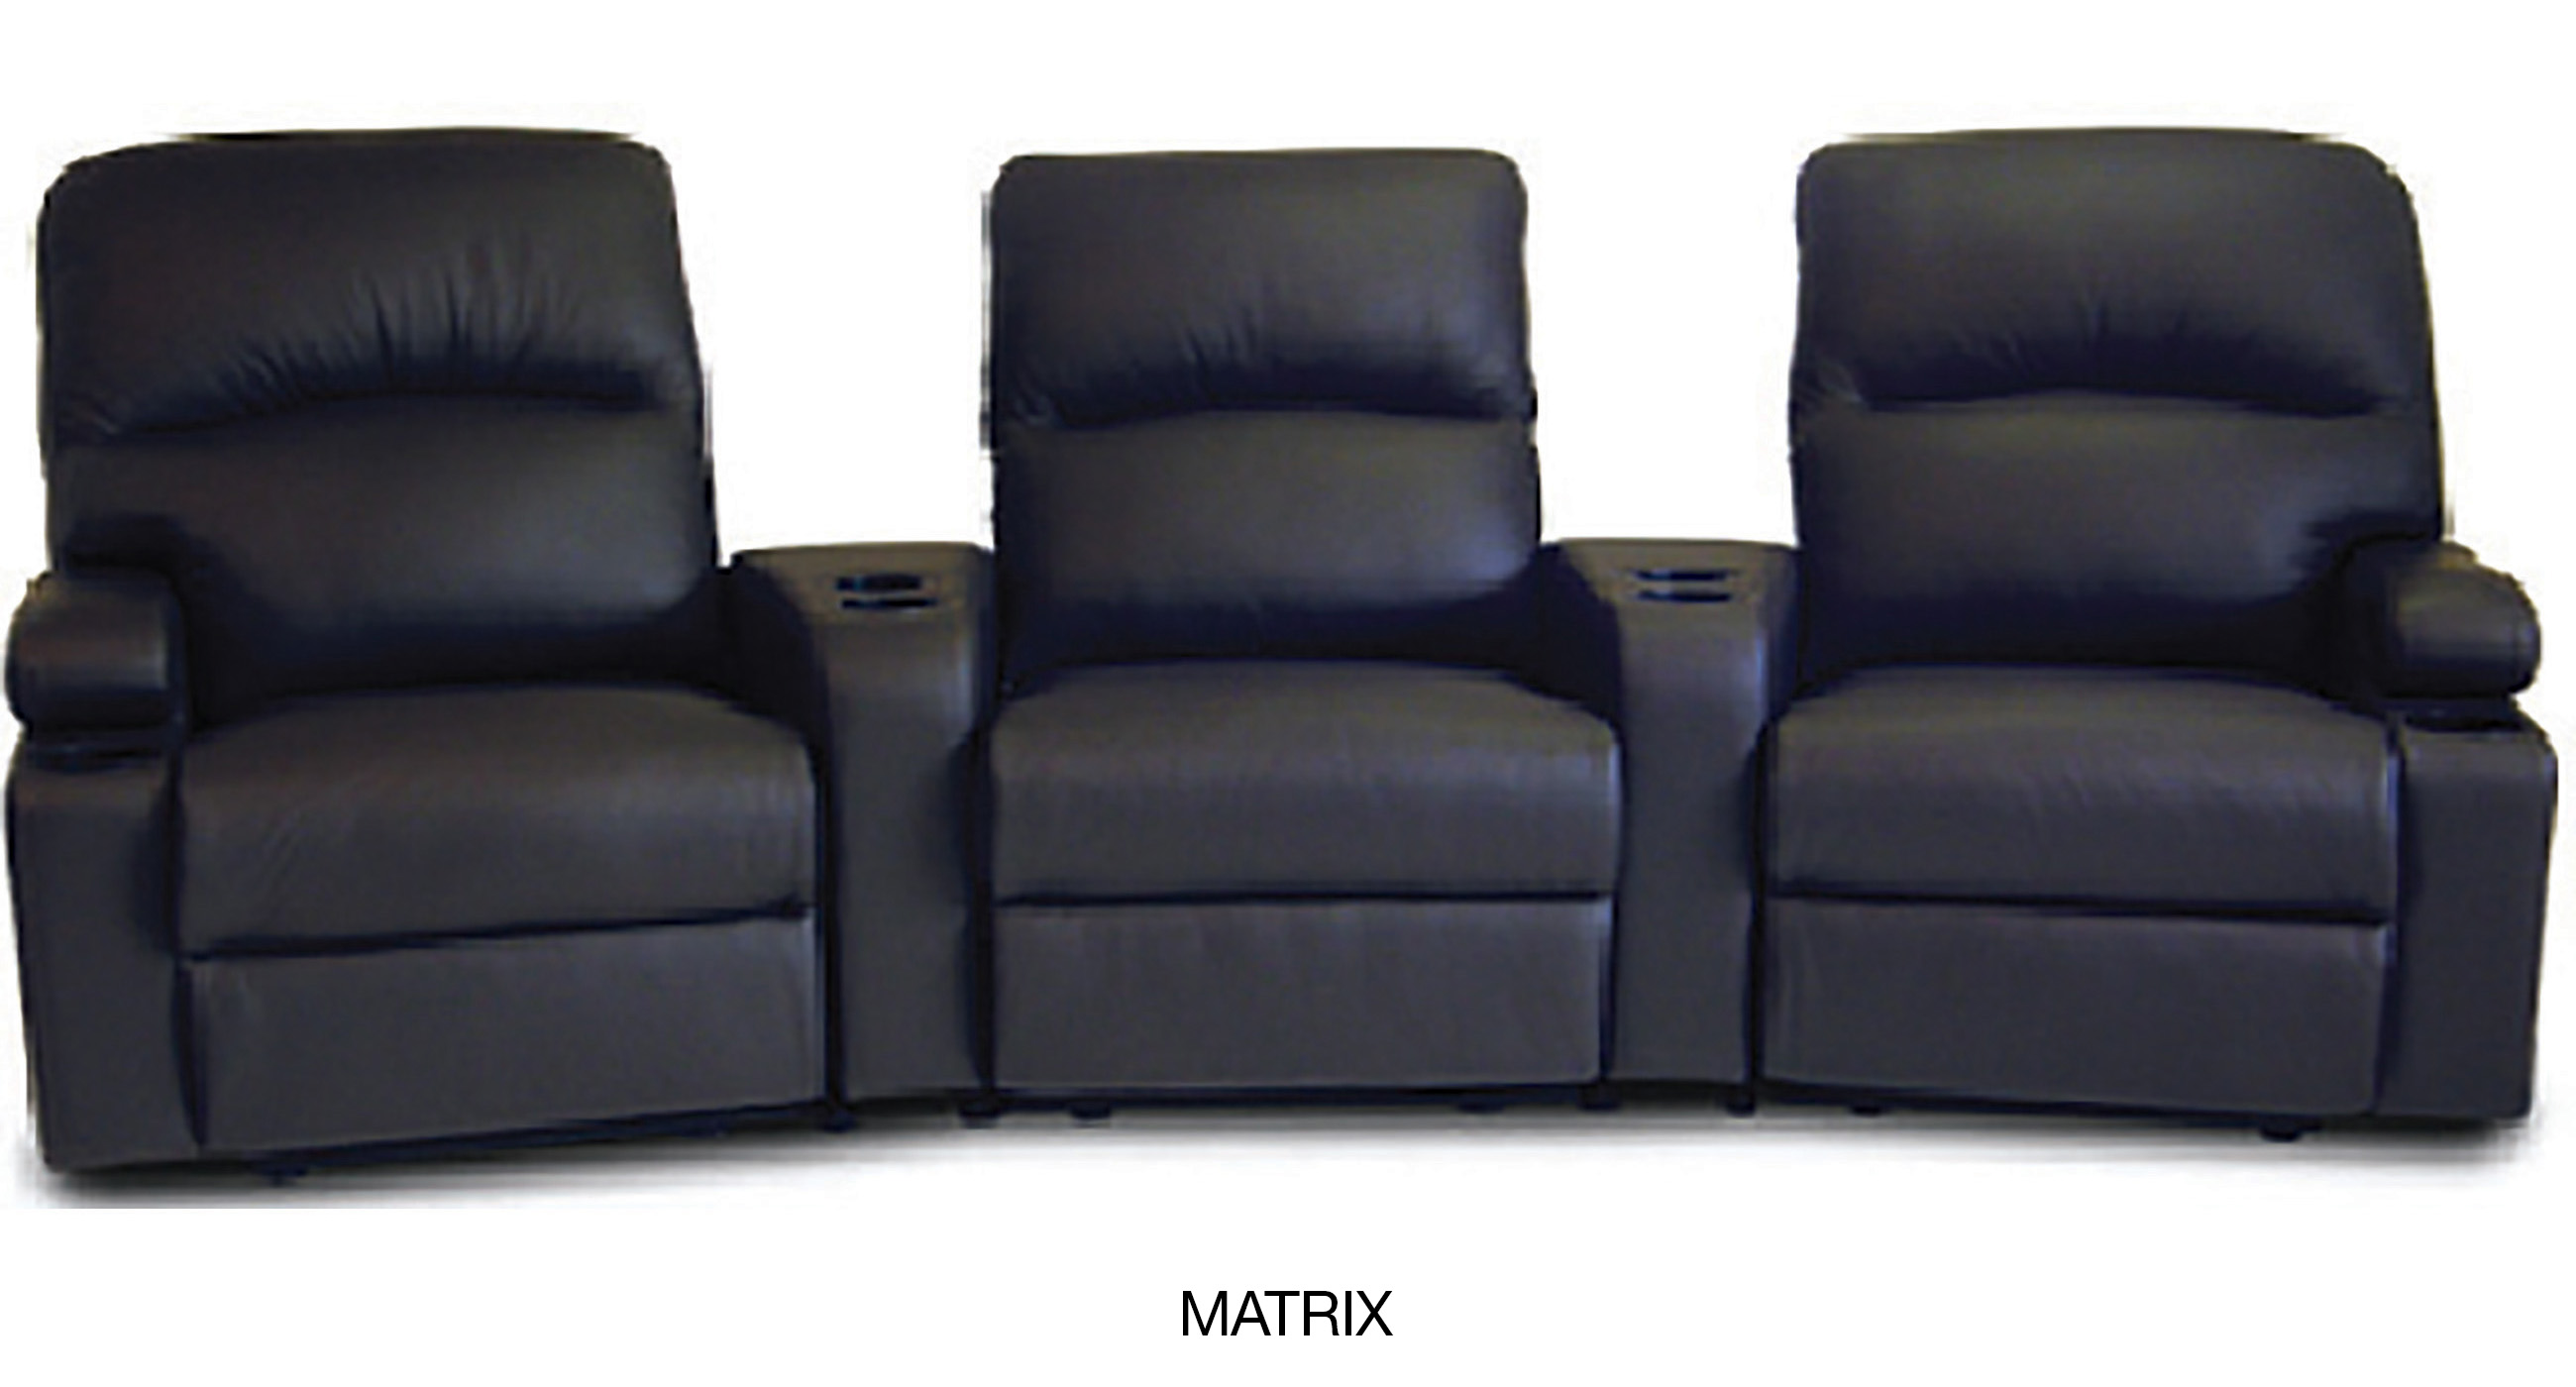 Deco, Retreat and Matrix Reclining Sofas and Chairs